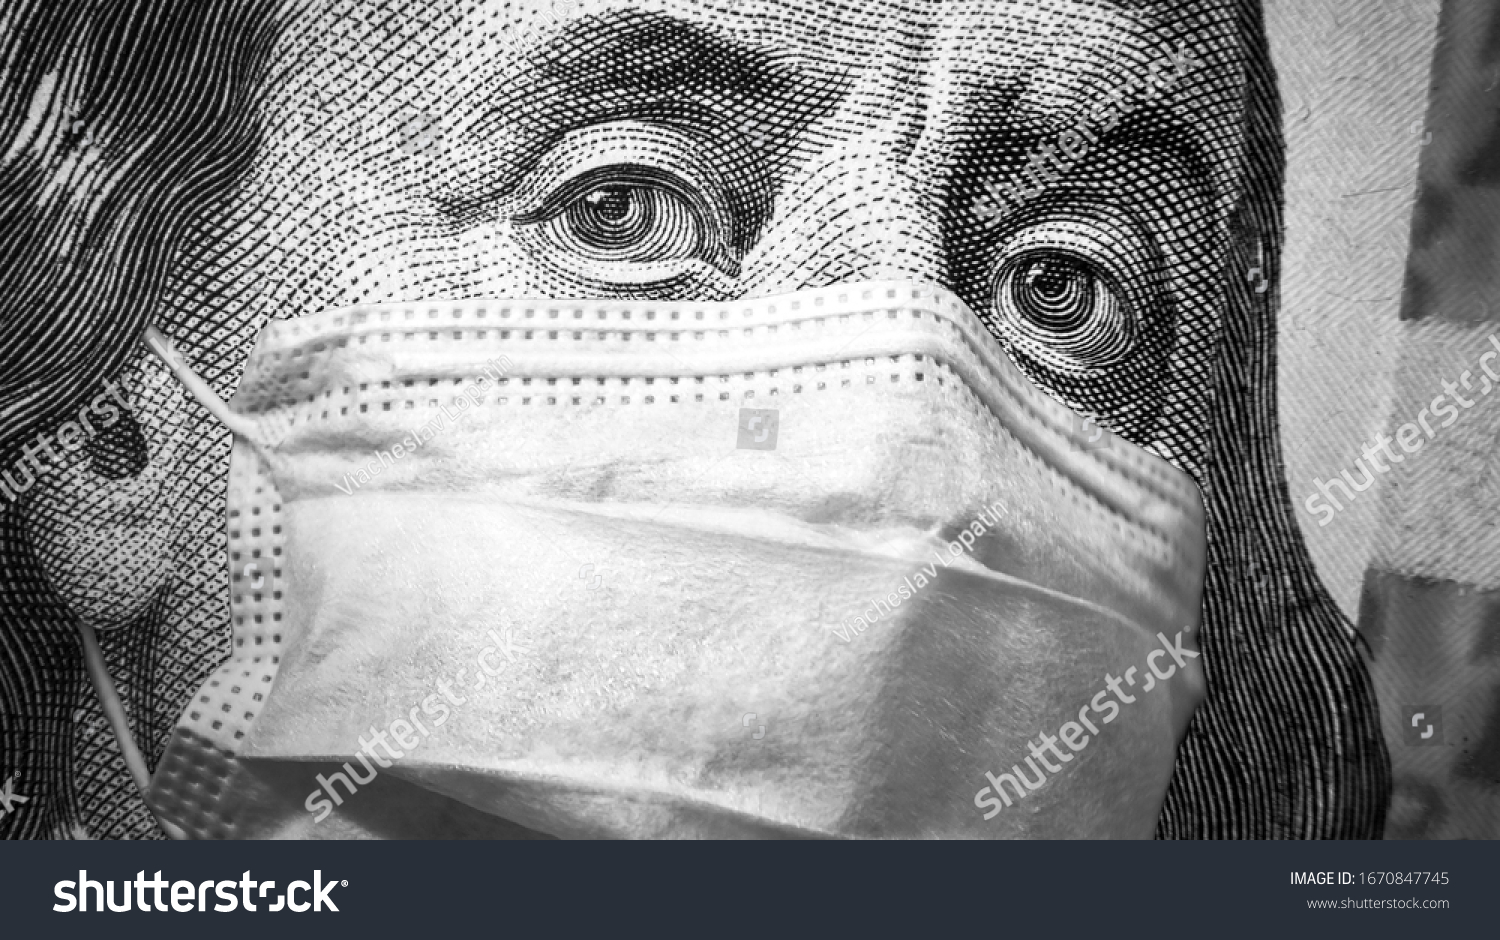 COVID-19, economy and crisis concept, US president Franklin's eyes and face mask on 100 dollar money bill. Corona virus affects global stock market. World finance hit by coronavirus pandemic fears. #1670847745